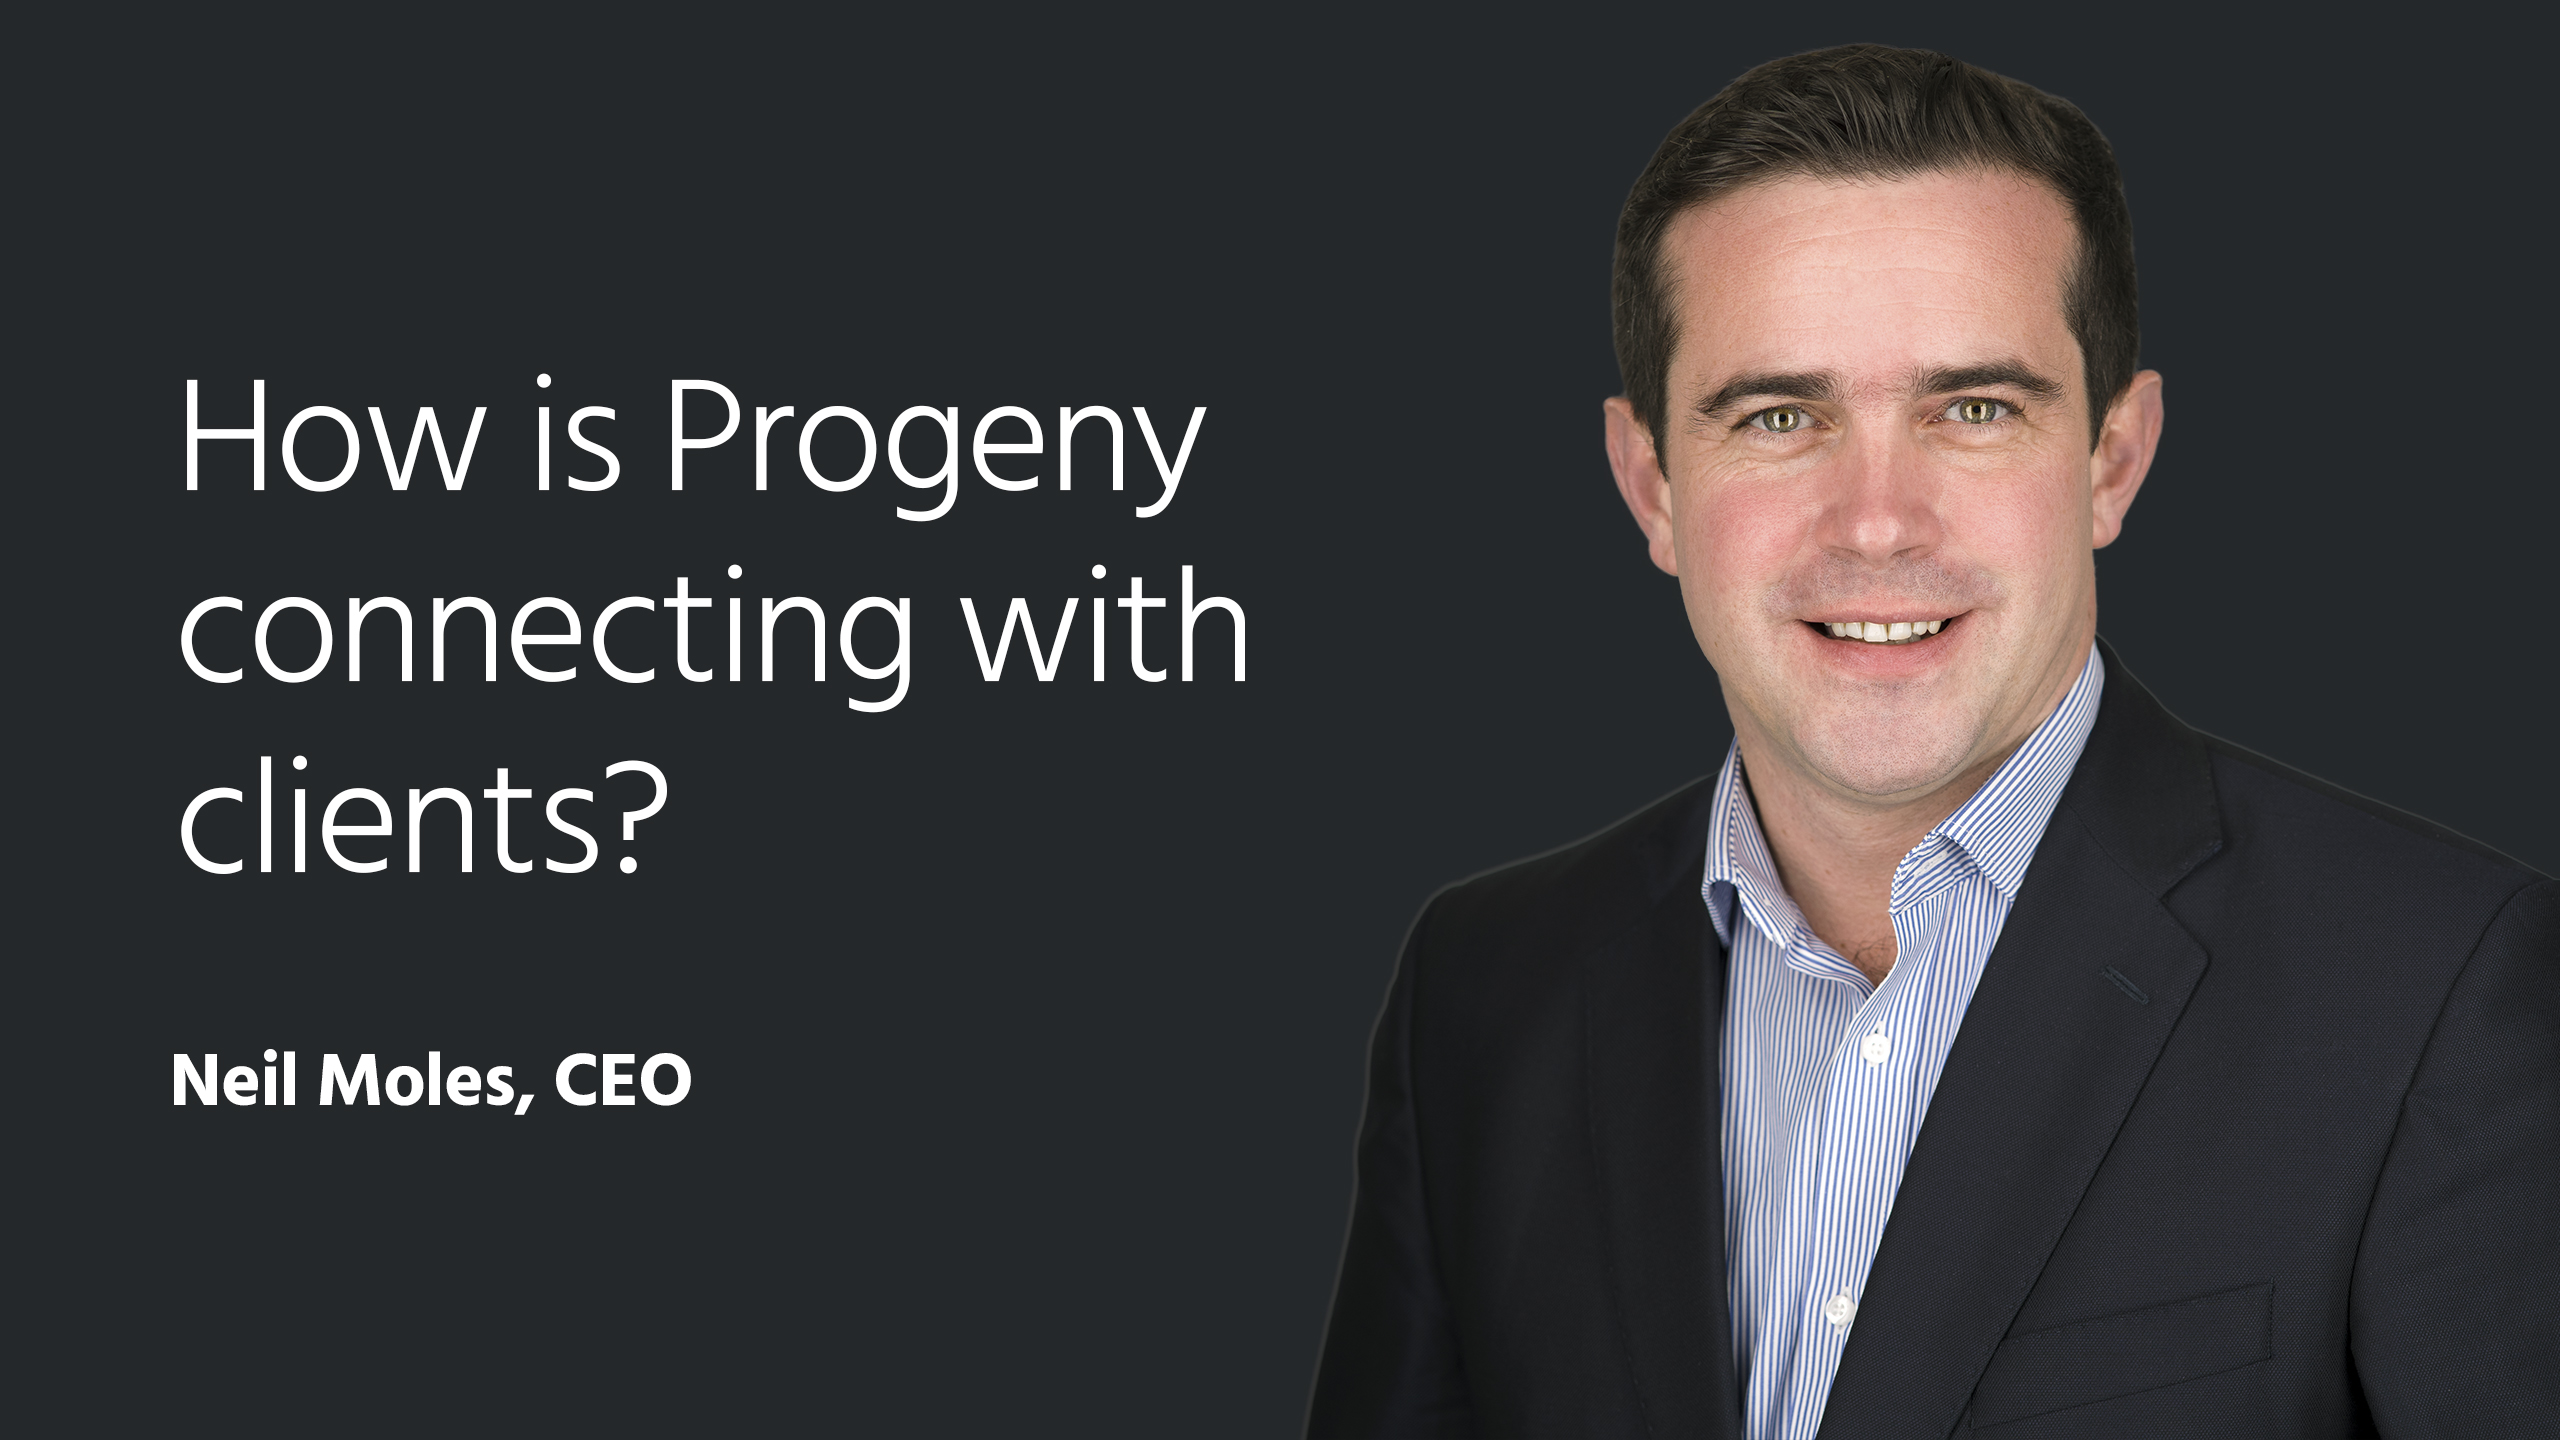 How is Progeny connecting with clients? Neil Moles, CEO